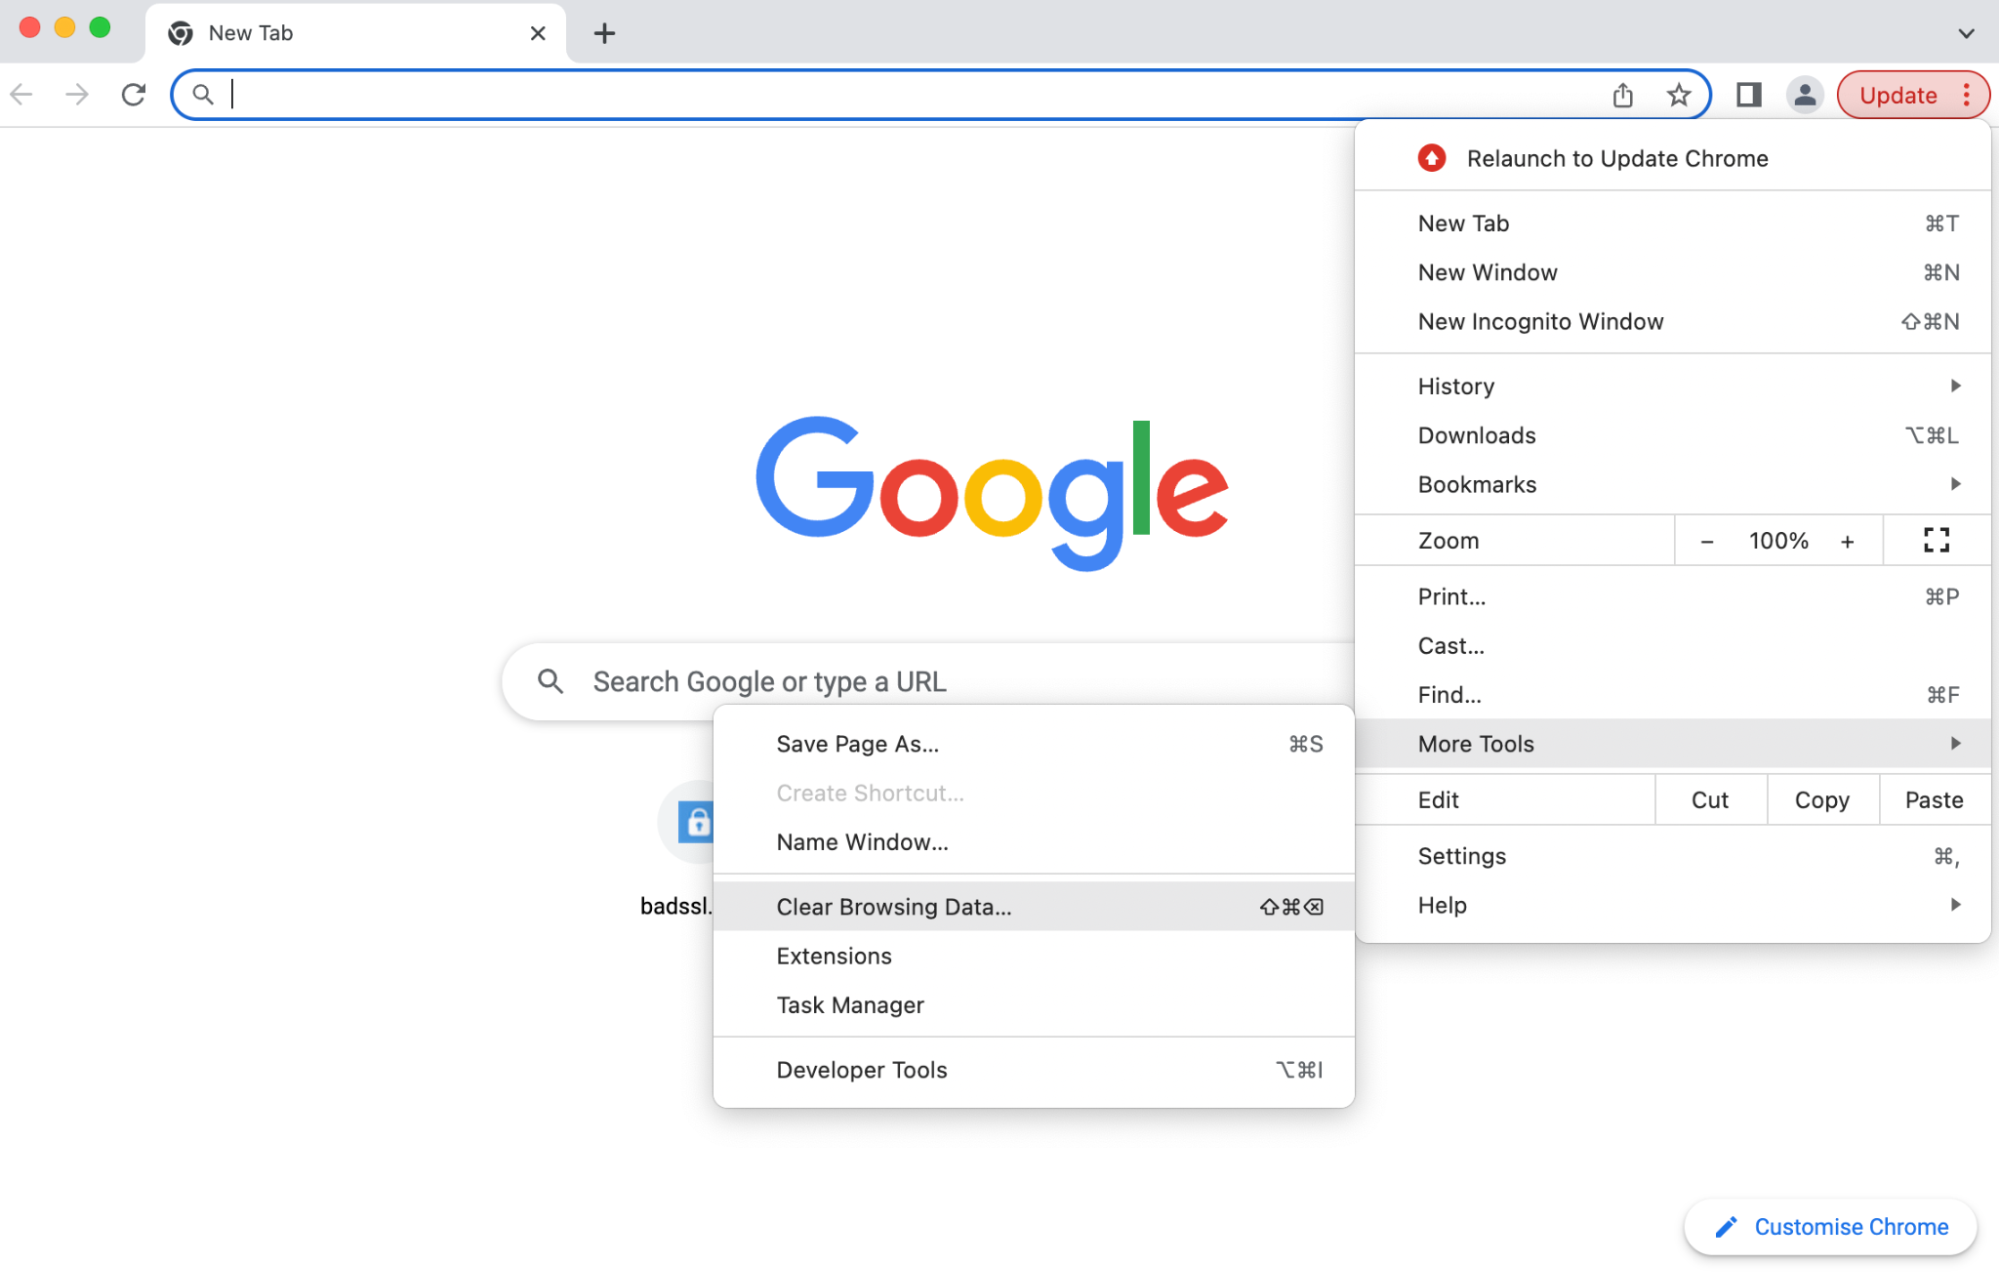 clearing browser cache in Google Chrome